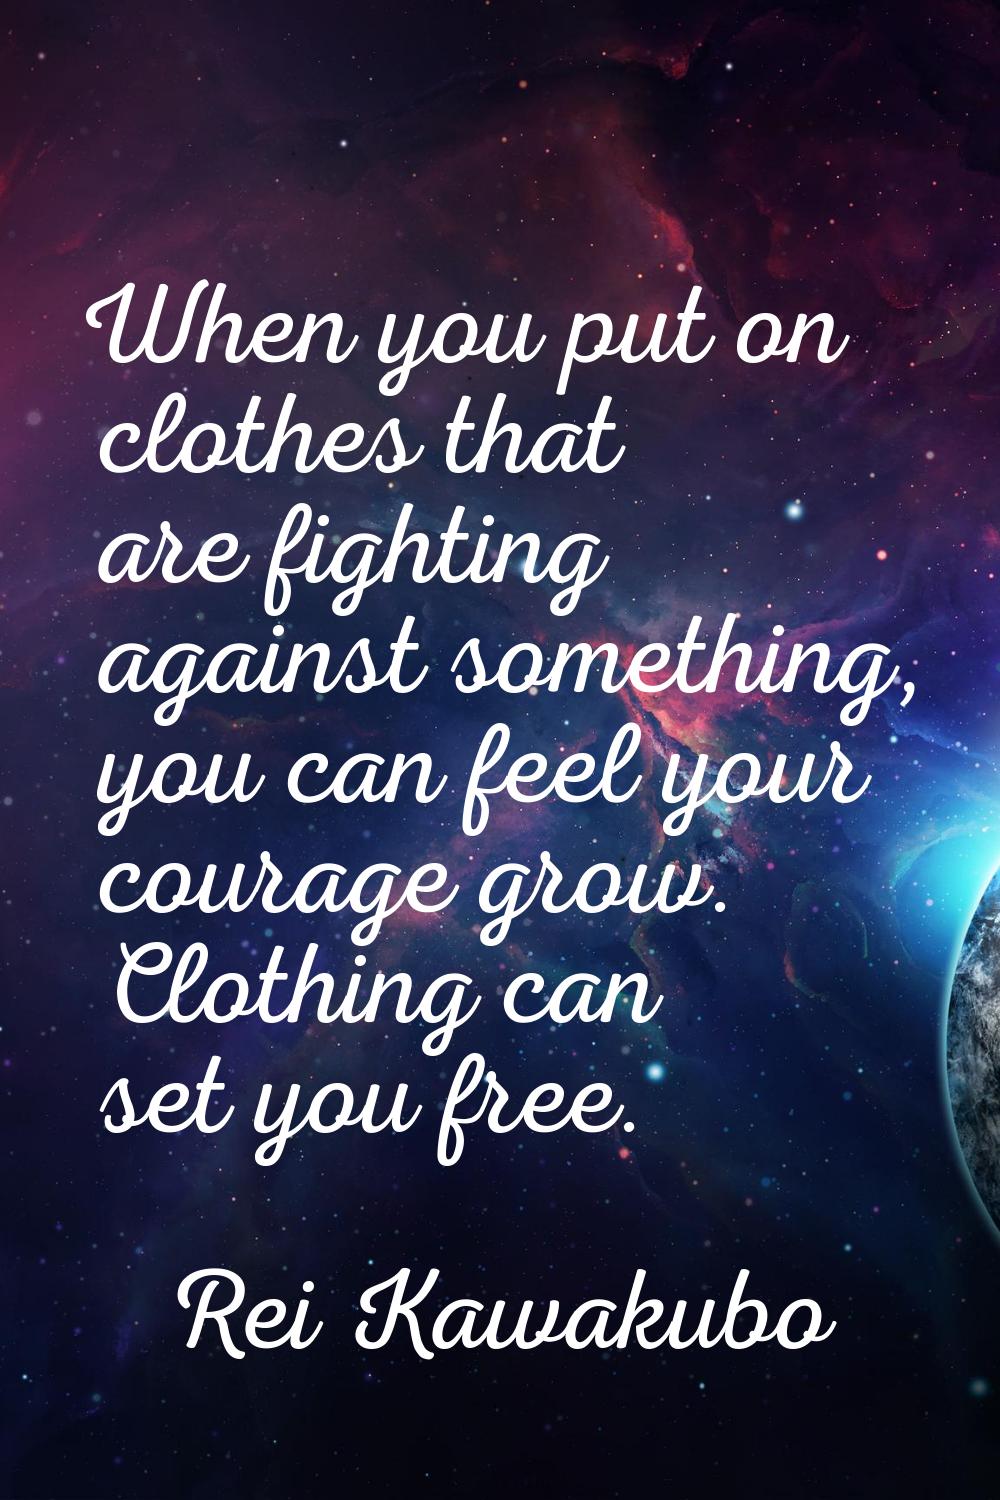 When you put on clothes that are fighting against something, you can feel your courage grow. Clothi